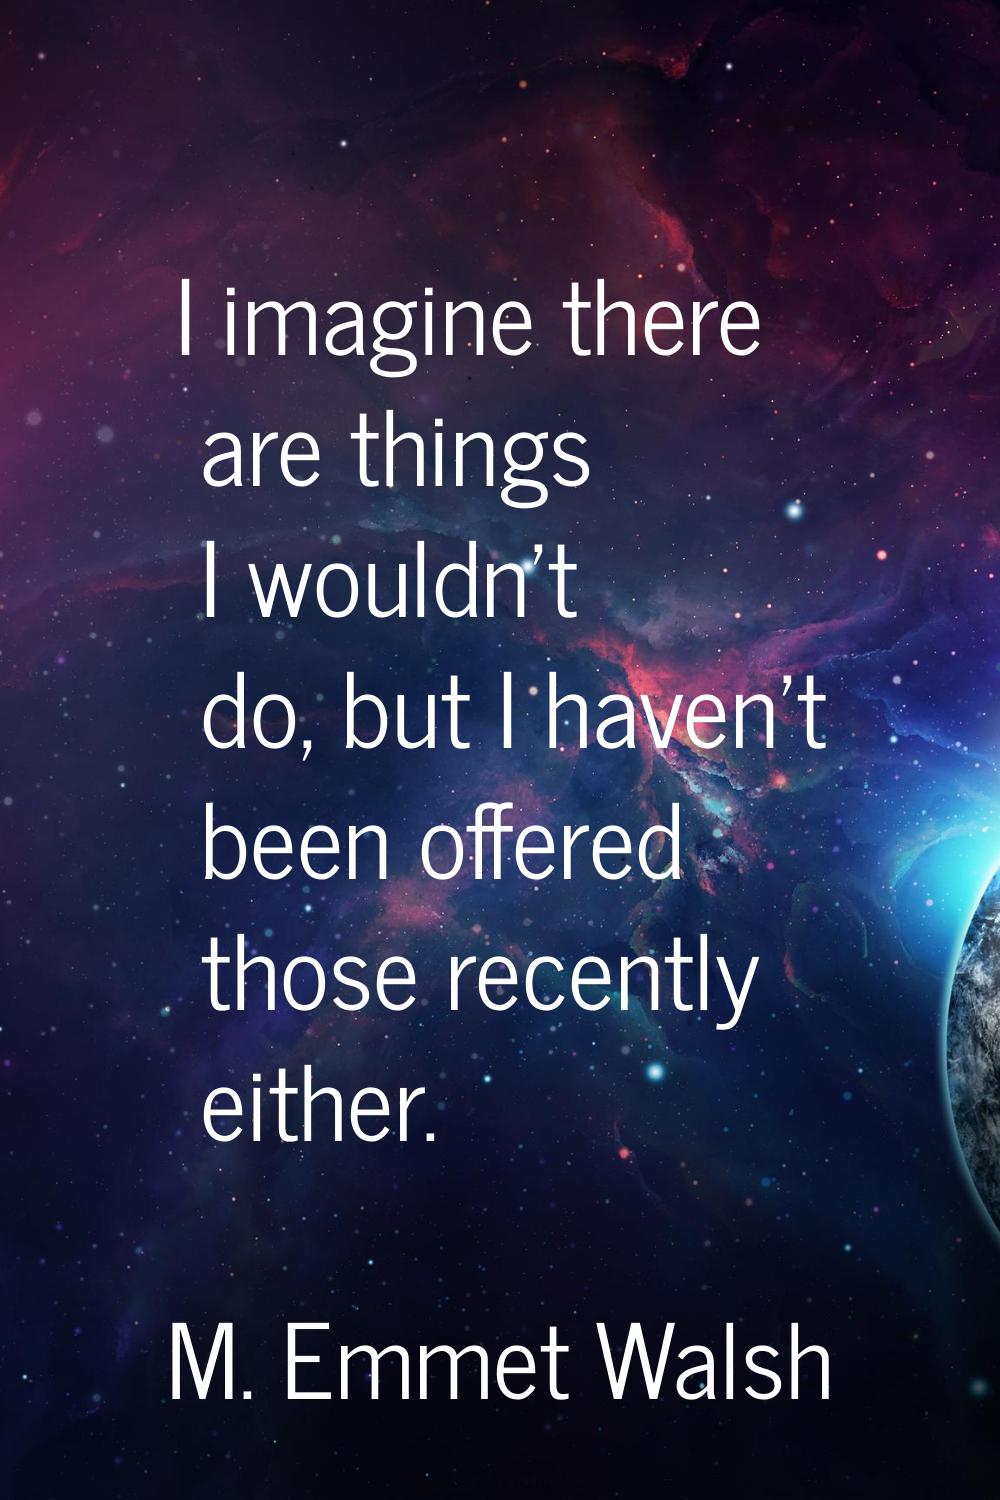 I imagine there are things I wouldn't do, but I haven't been offered those recently either.